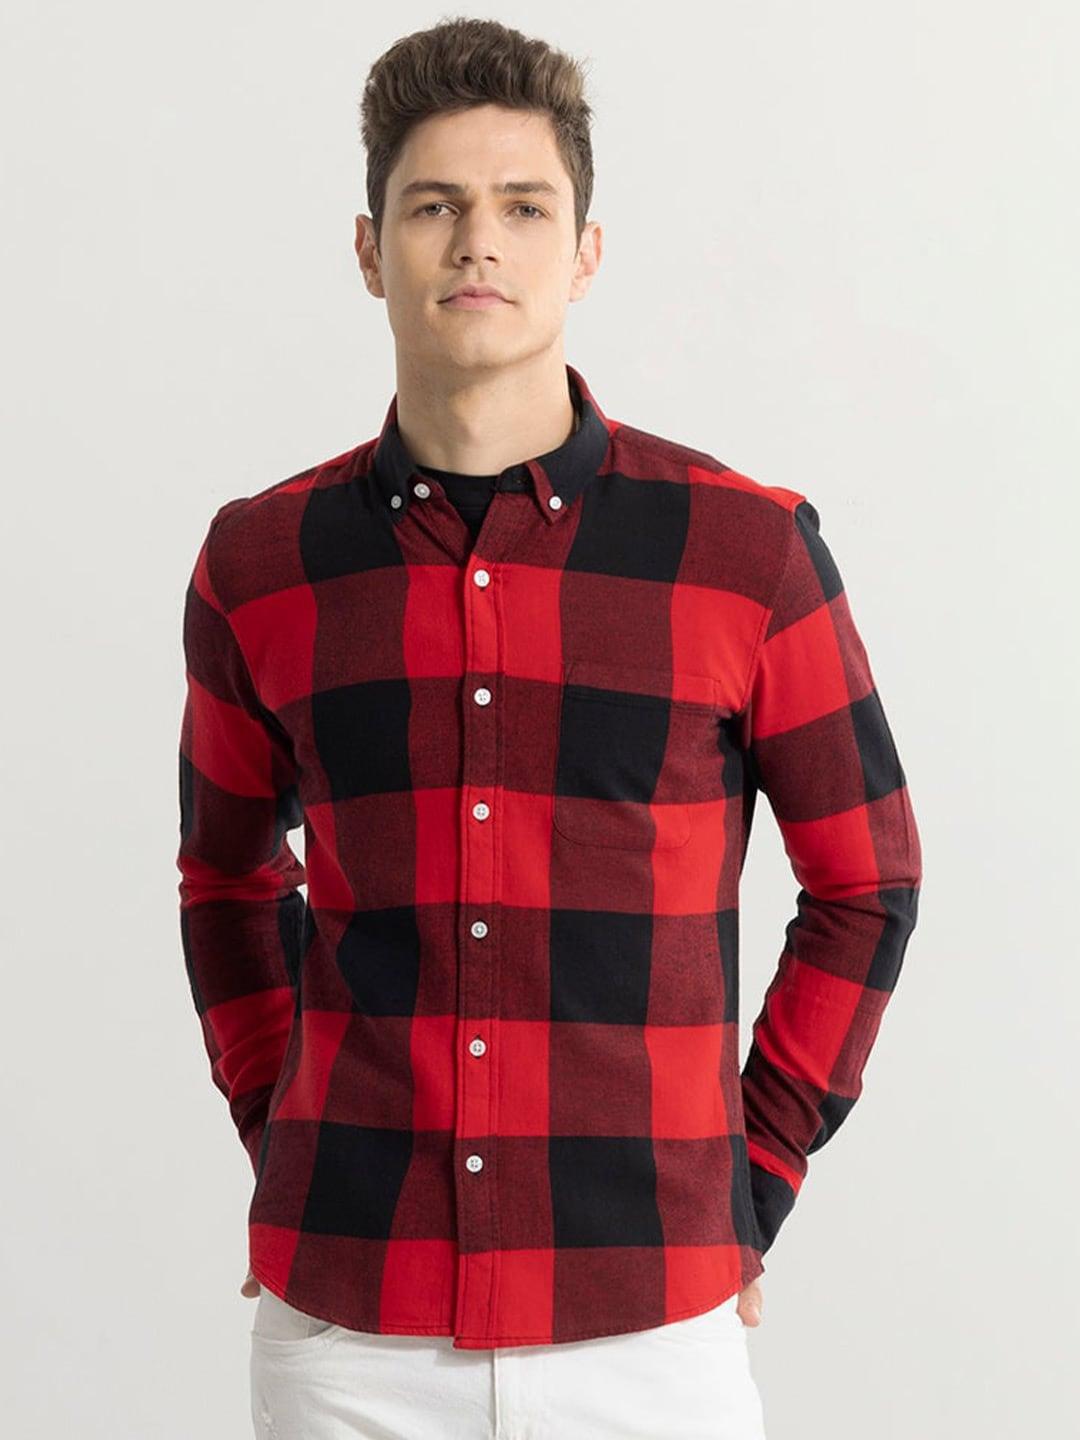 snitch-re-black-classic-slim-fit-buffalo-checked-pure-cotton-casual-shirt